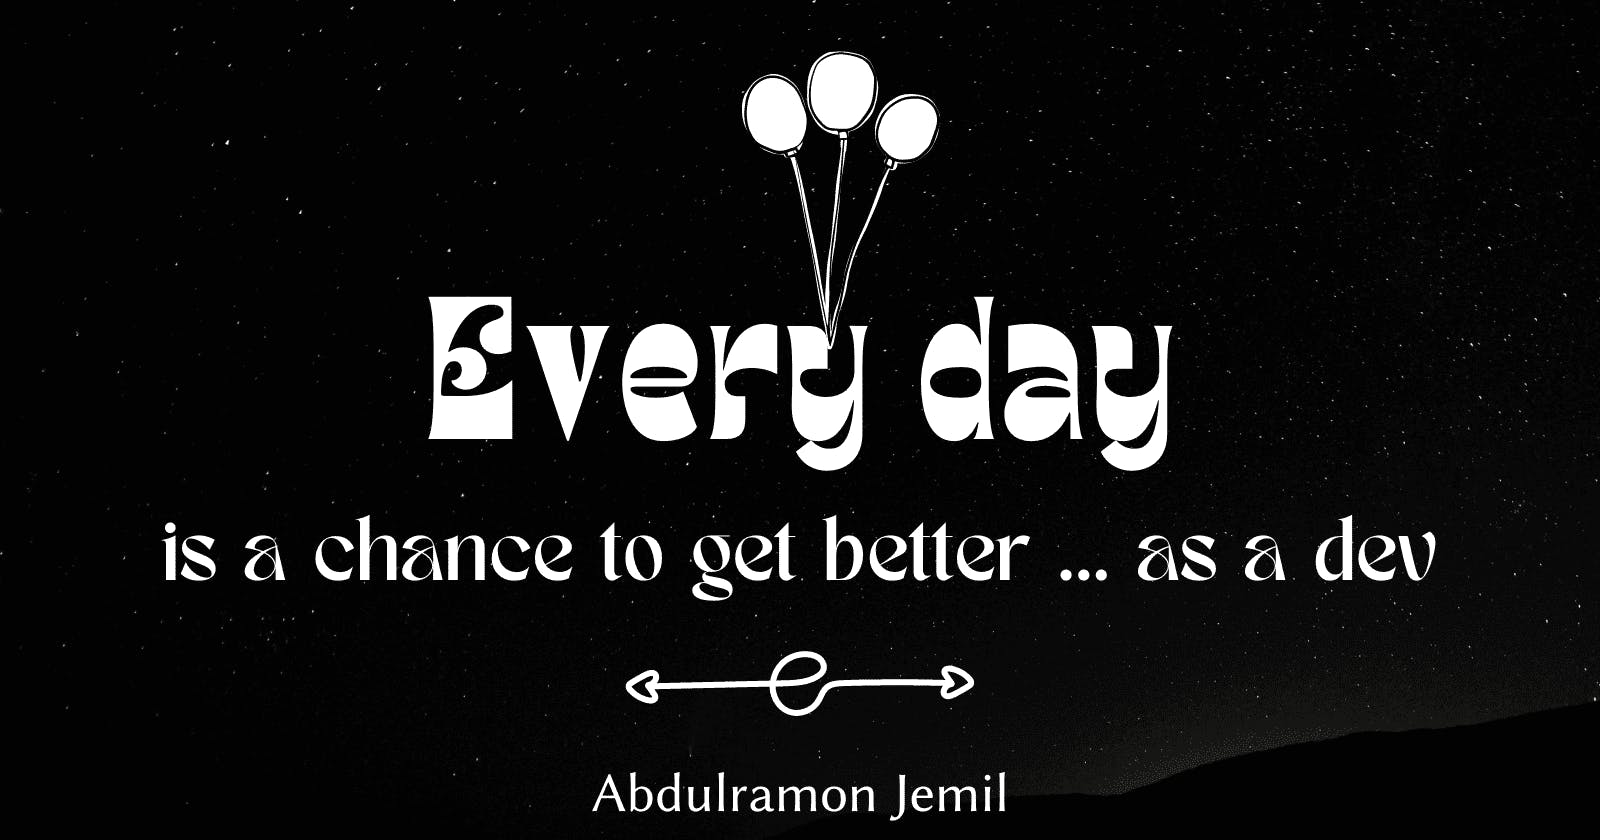 Every day is a chance to get better ... as a dev